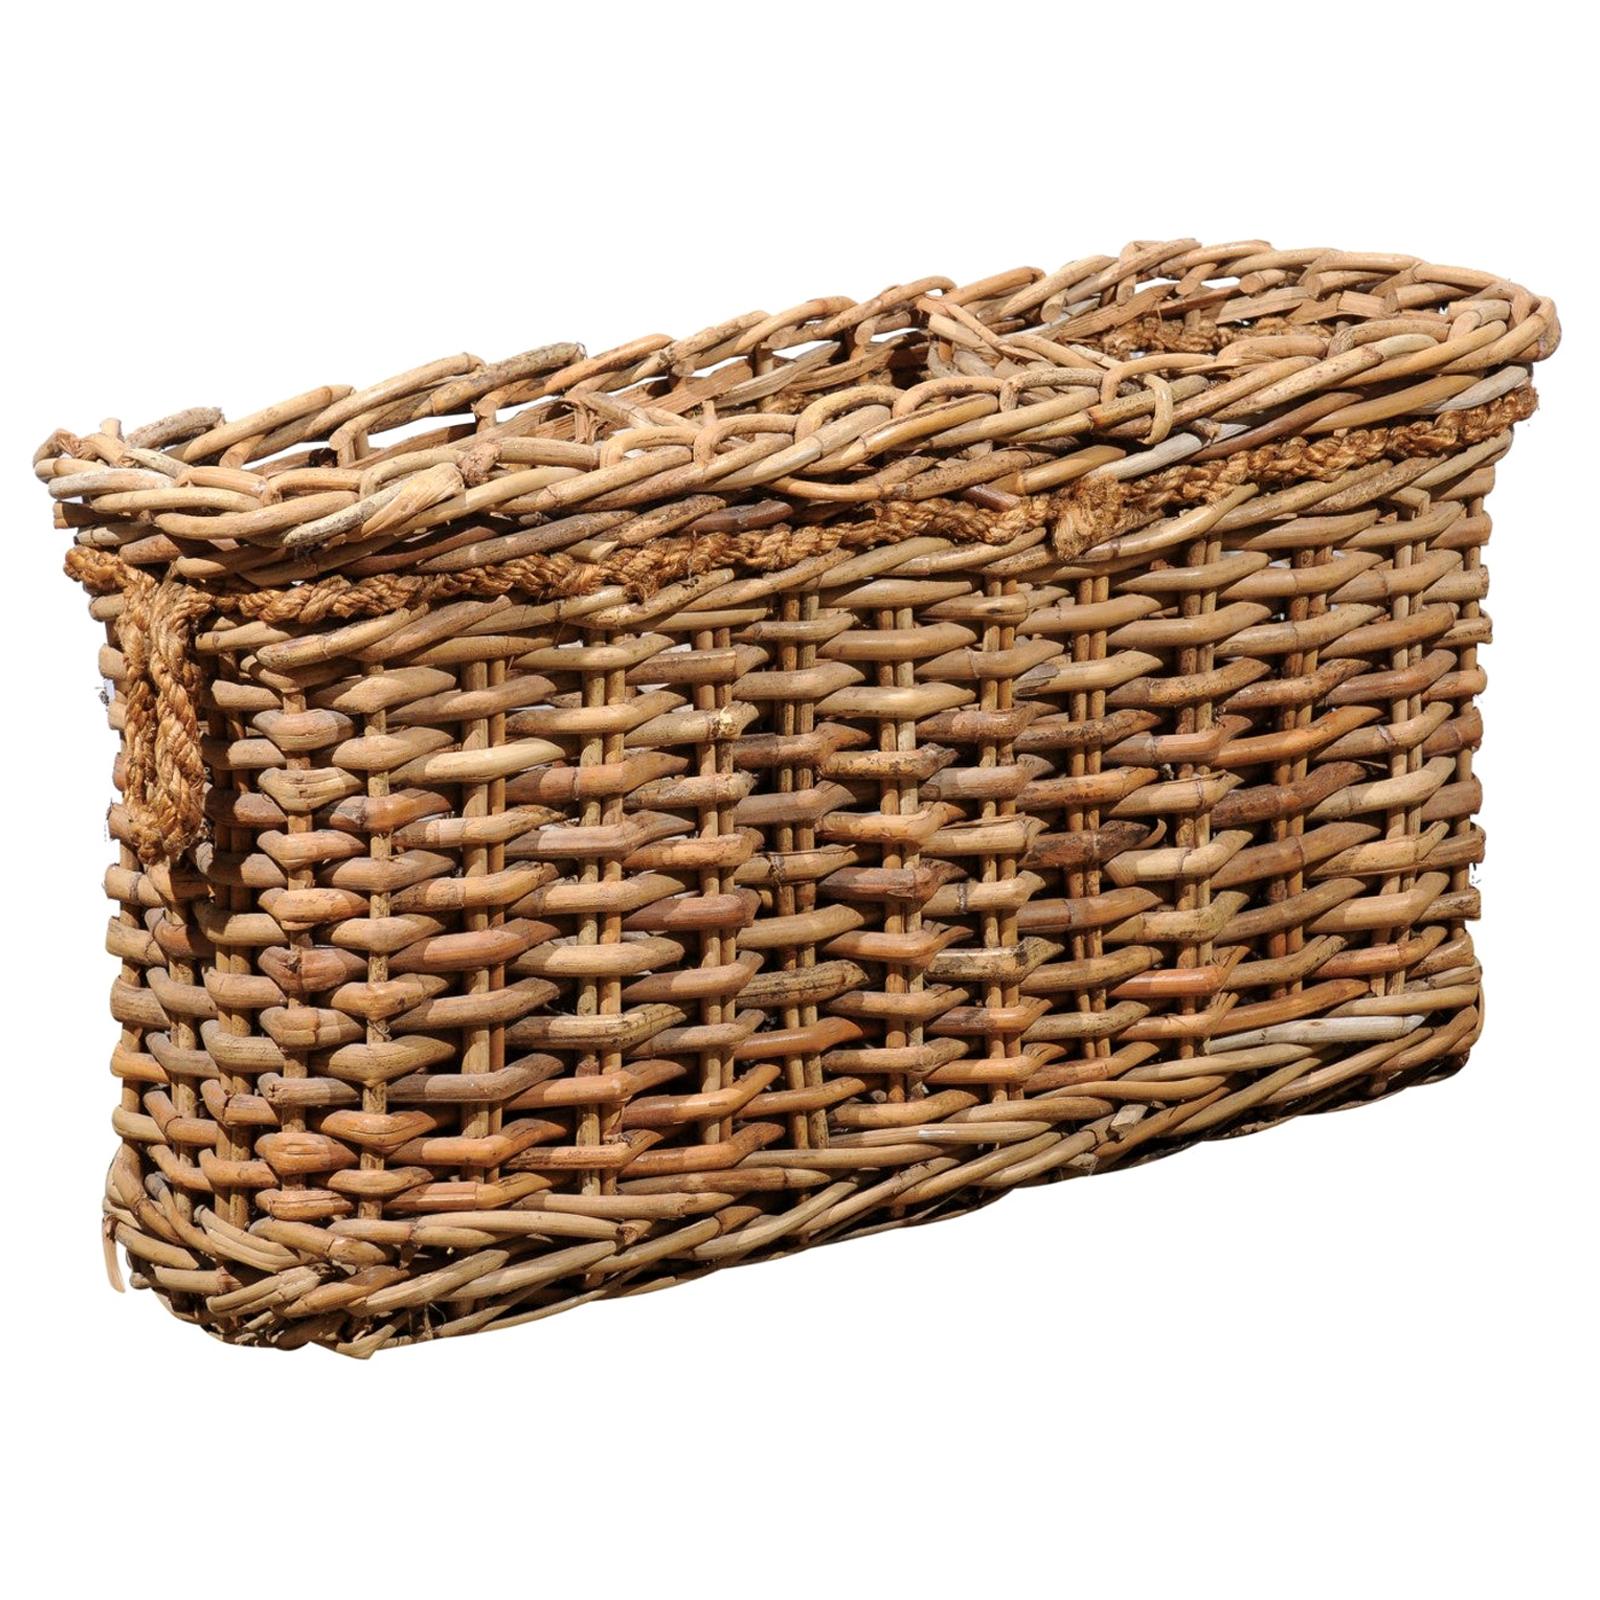 Rustic French Narrow Rectangular Partitioned Wicker Basket with Rope Handles